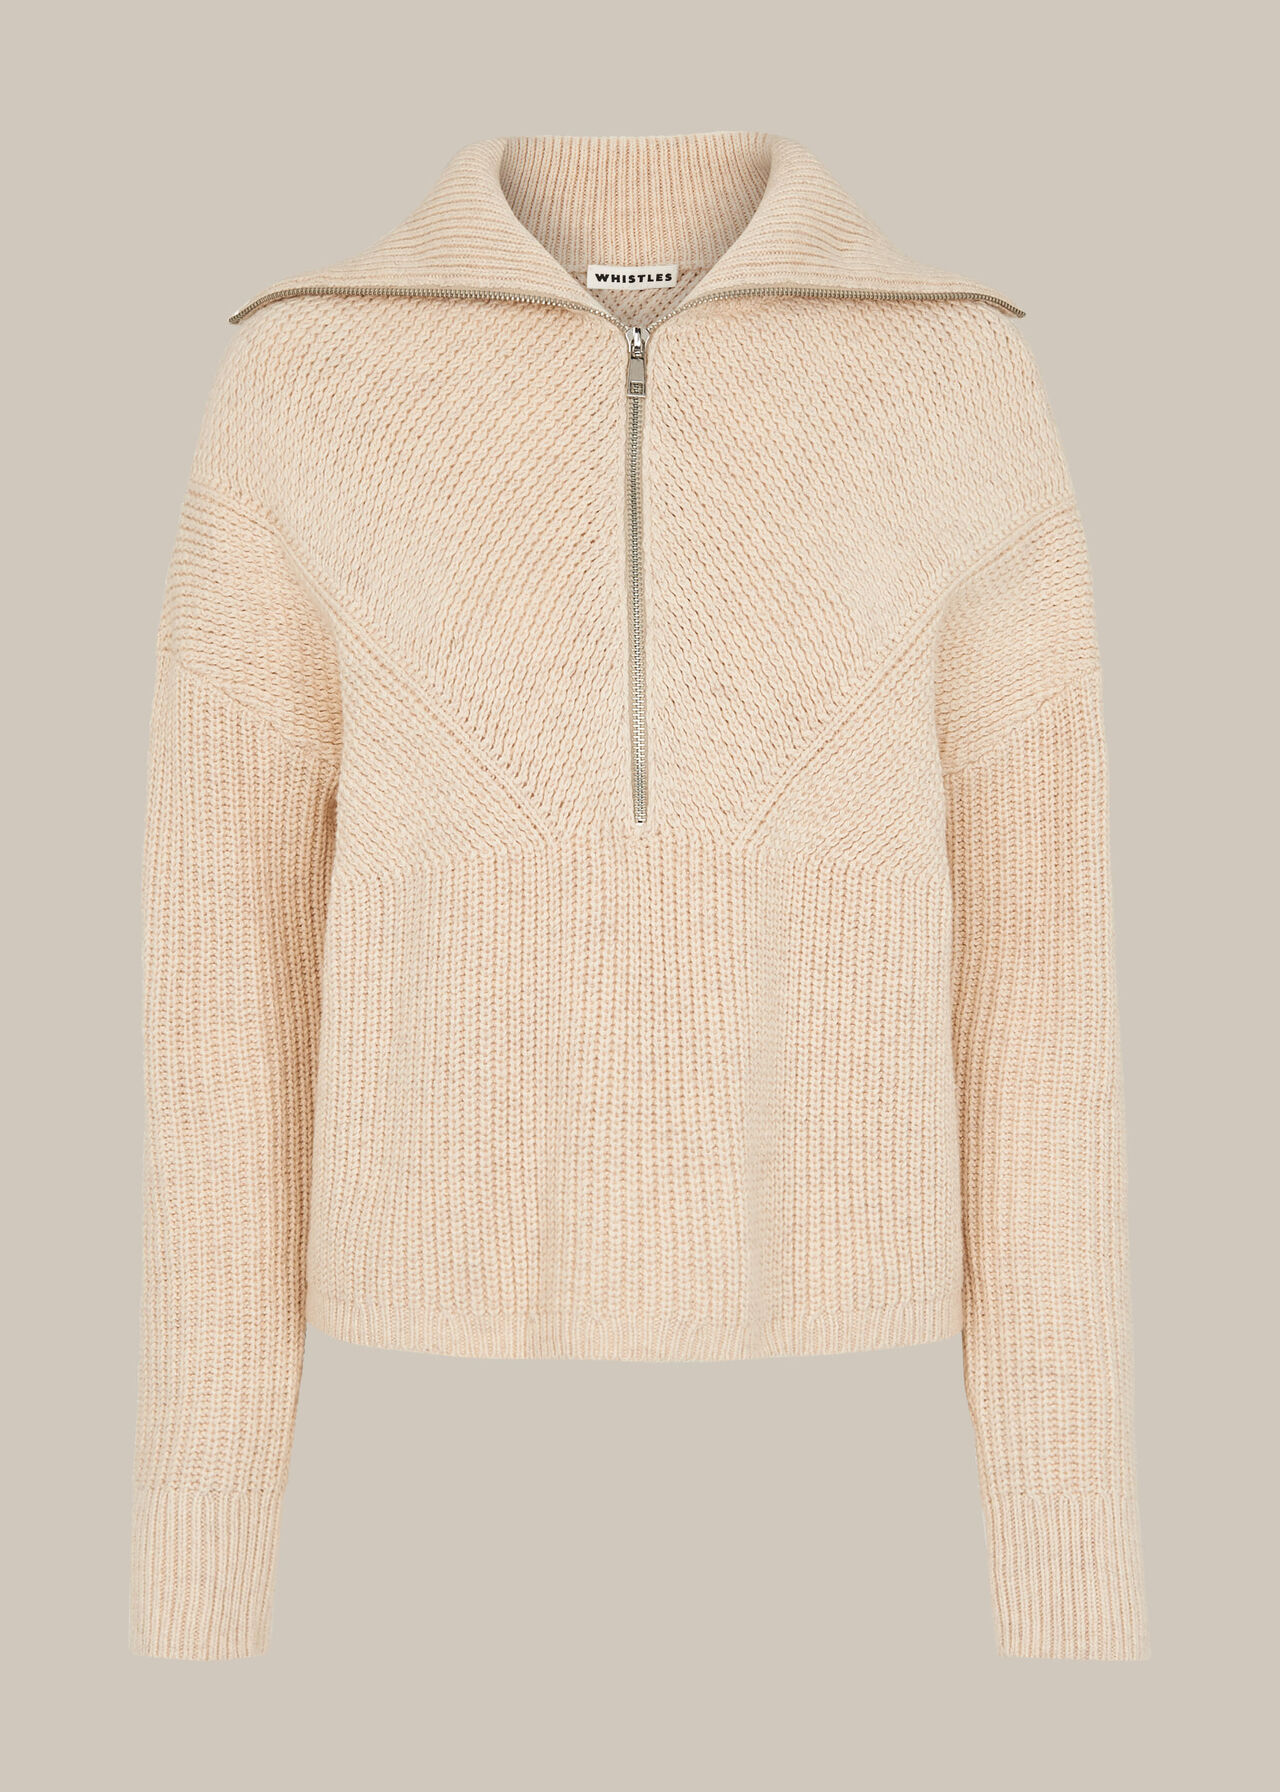 Oatmeal Knitted Zip Neck Sweater | WHISTLES